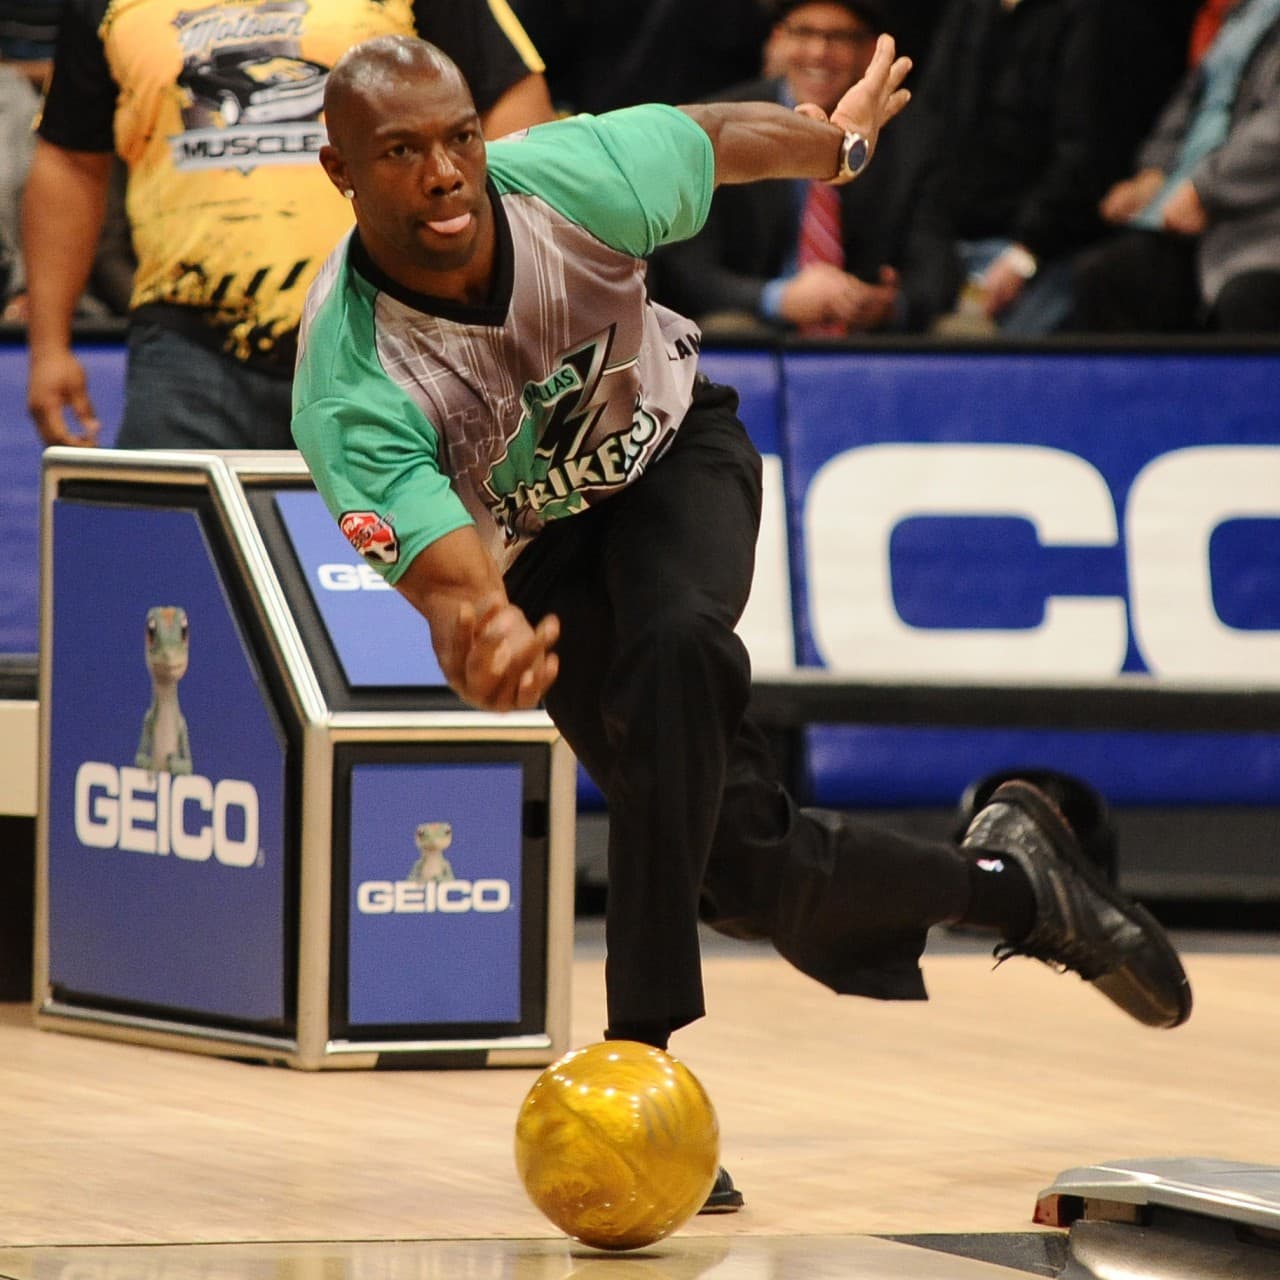 1031_oag_to-bowling-CROP